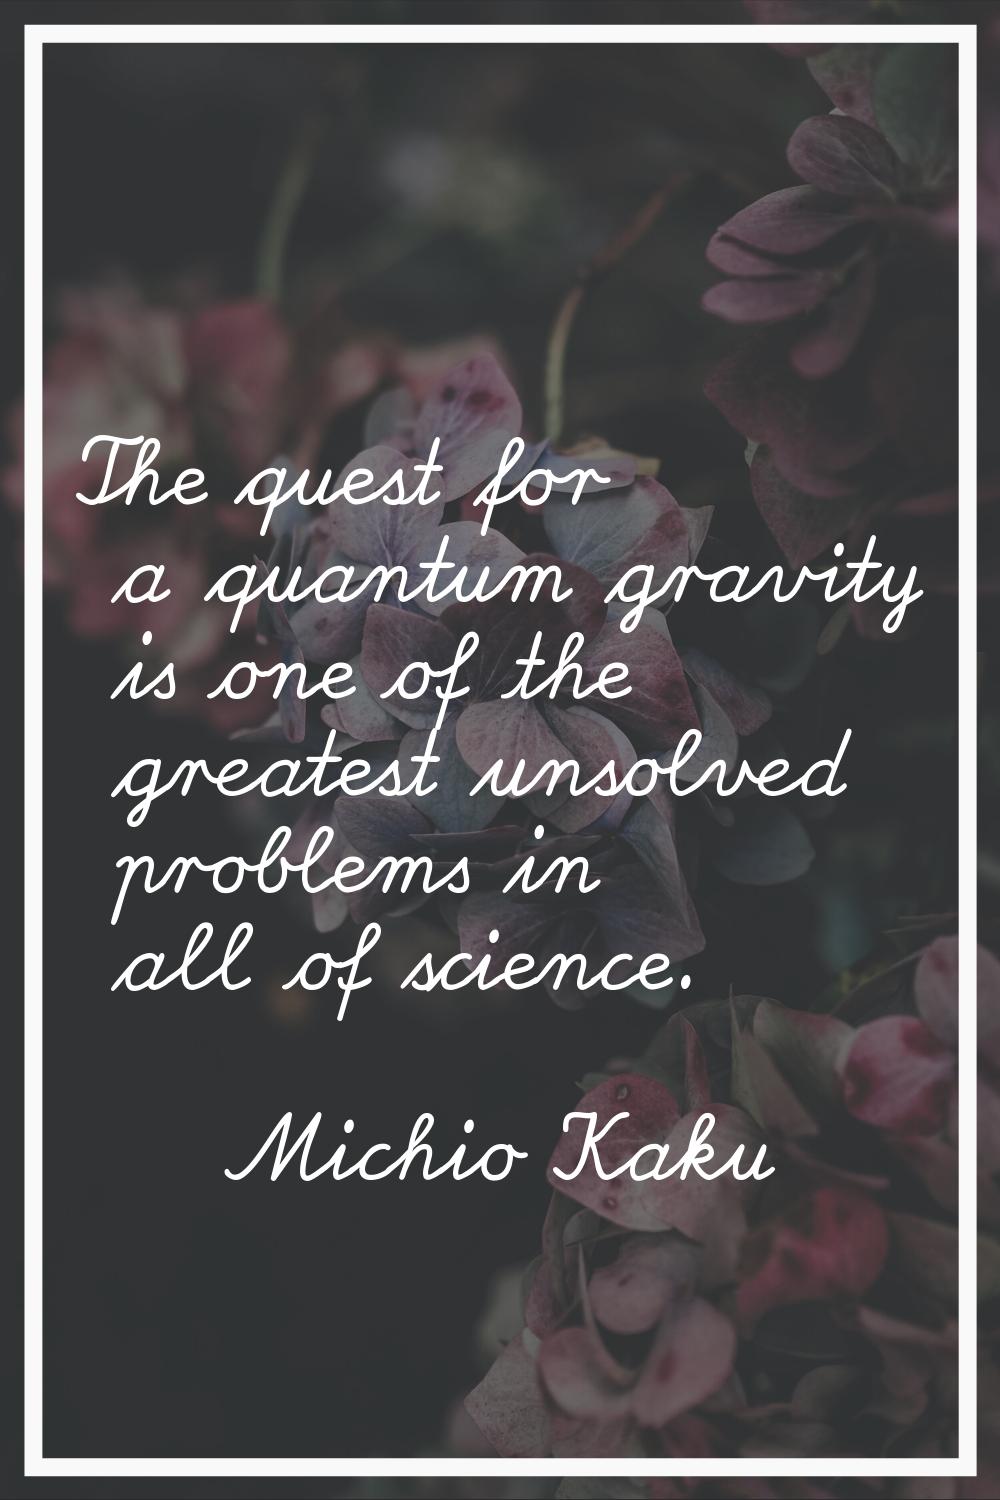 The quest for a quantum gravity is one of the greatest unsolved problems in all of science.